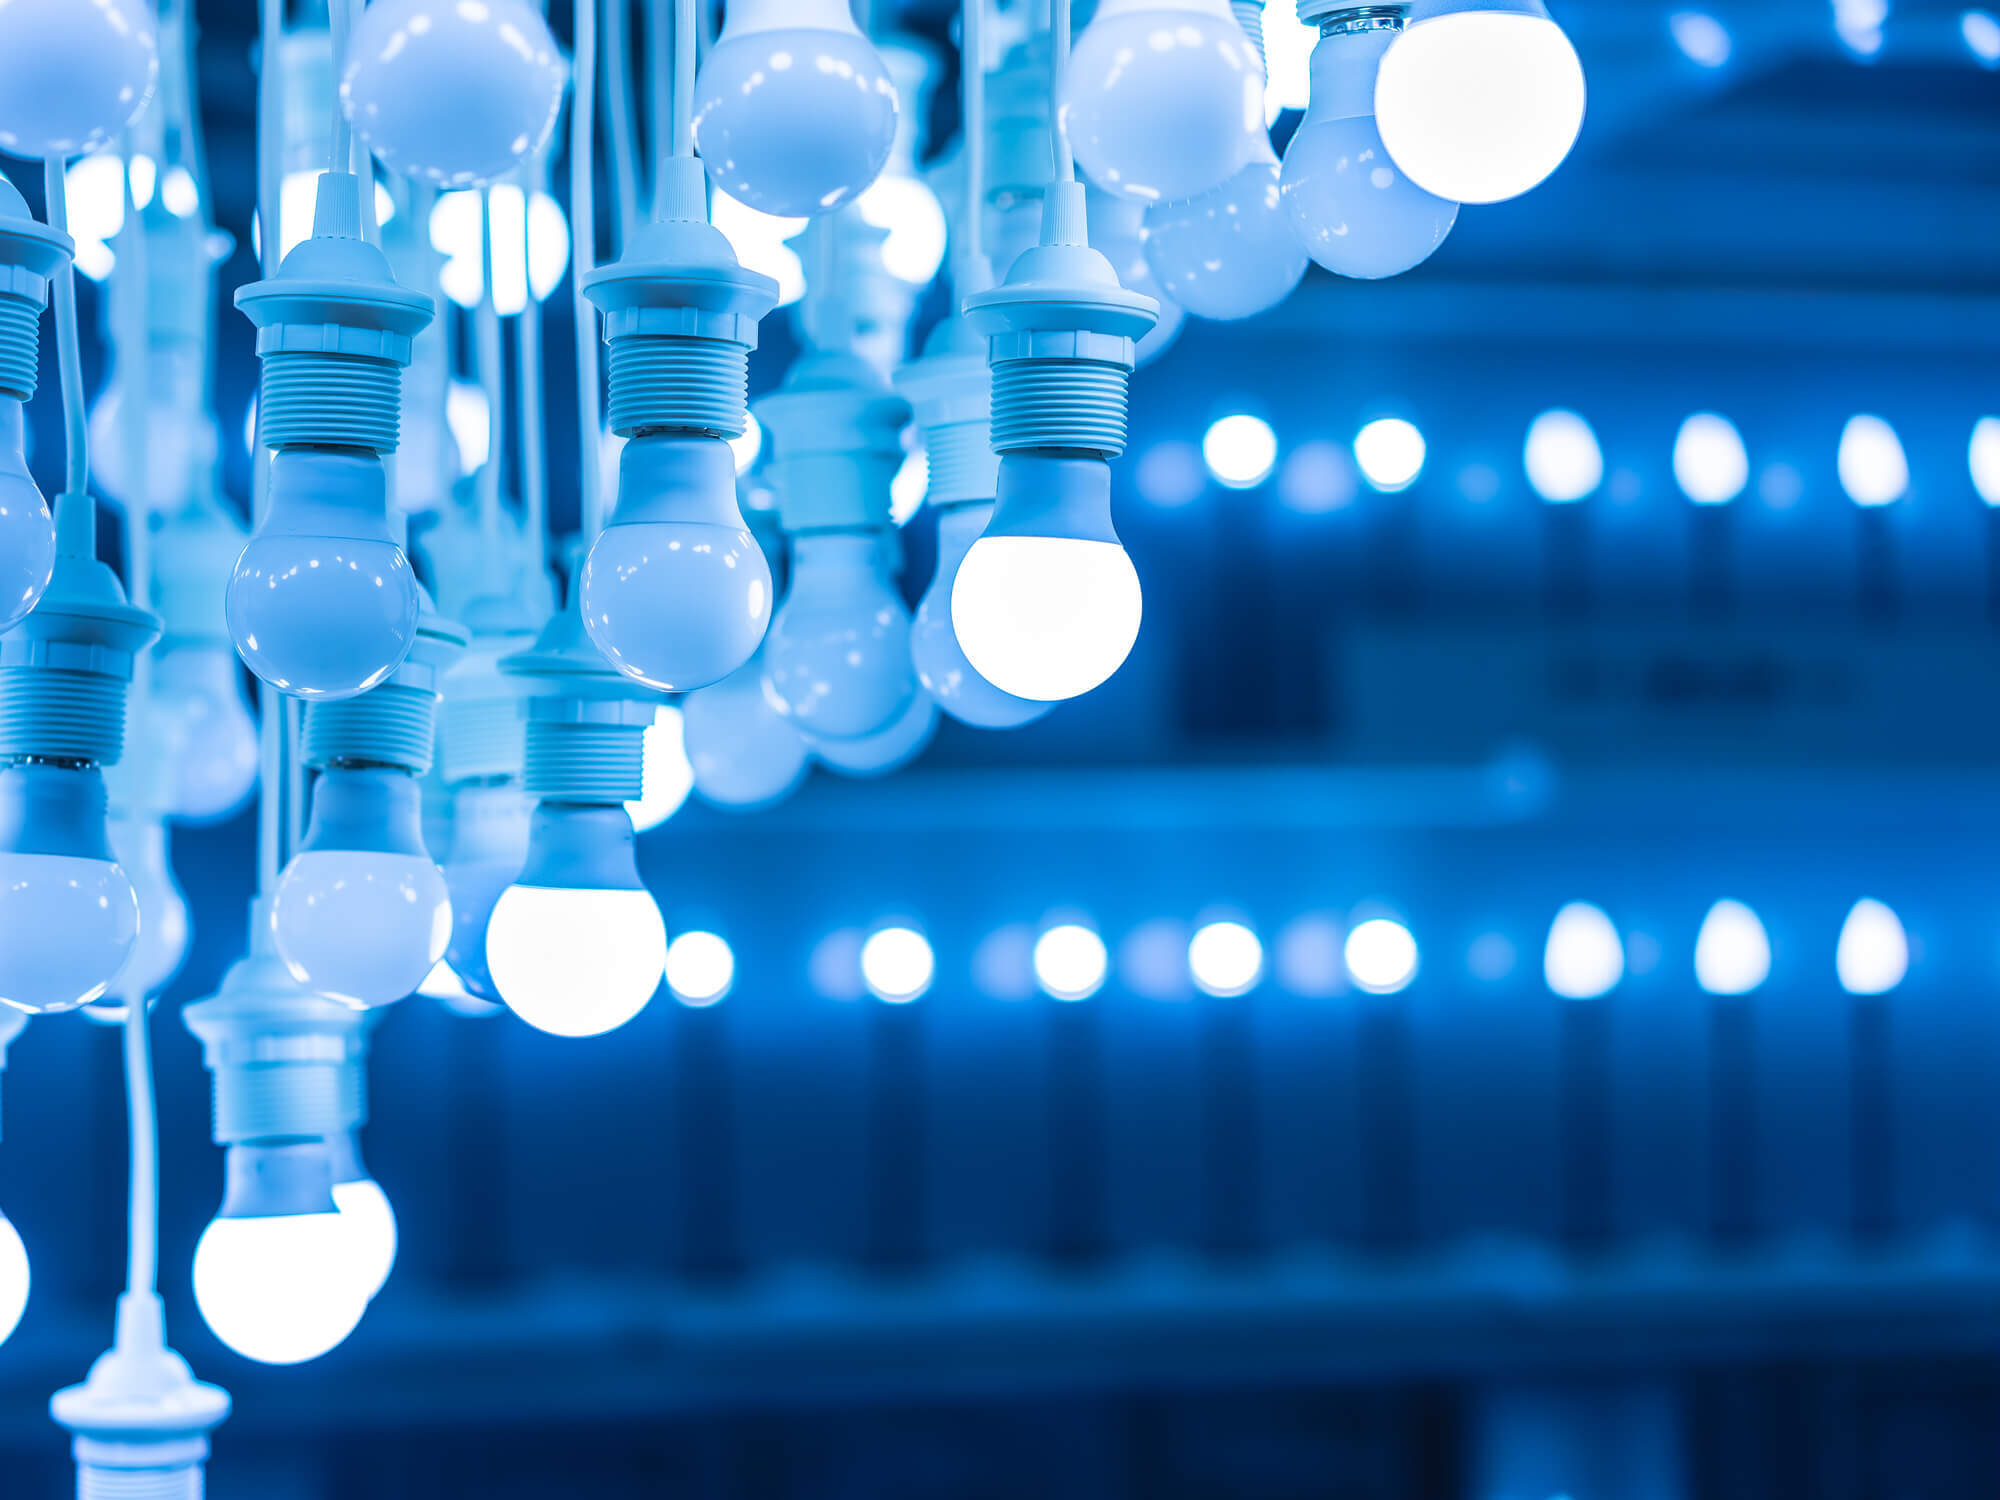 the Lighting Industry's toward a Future of Sustainability